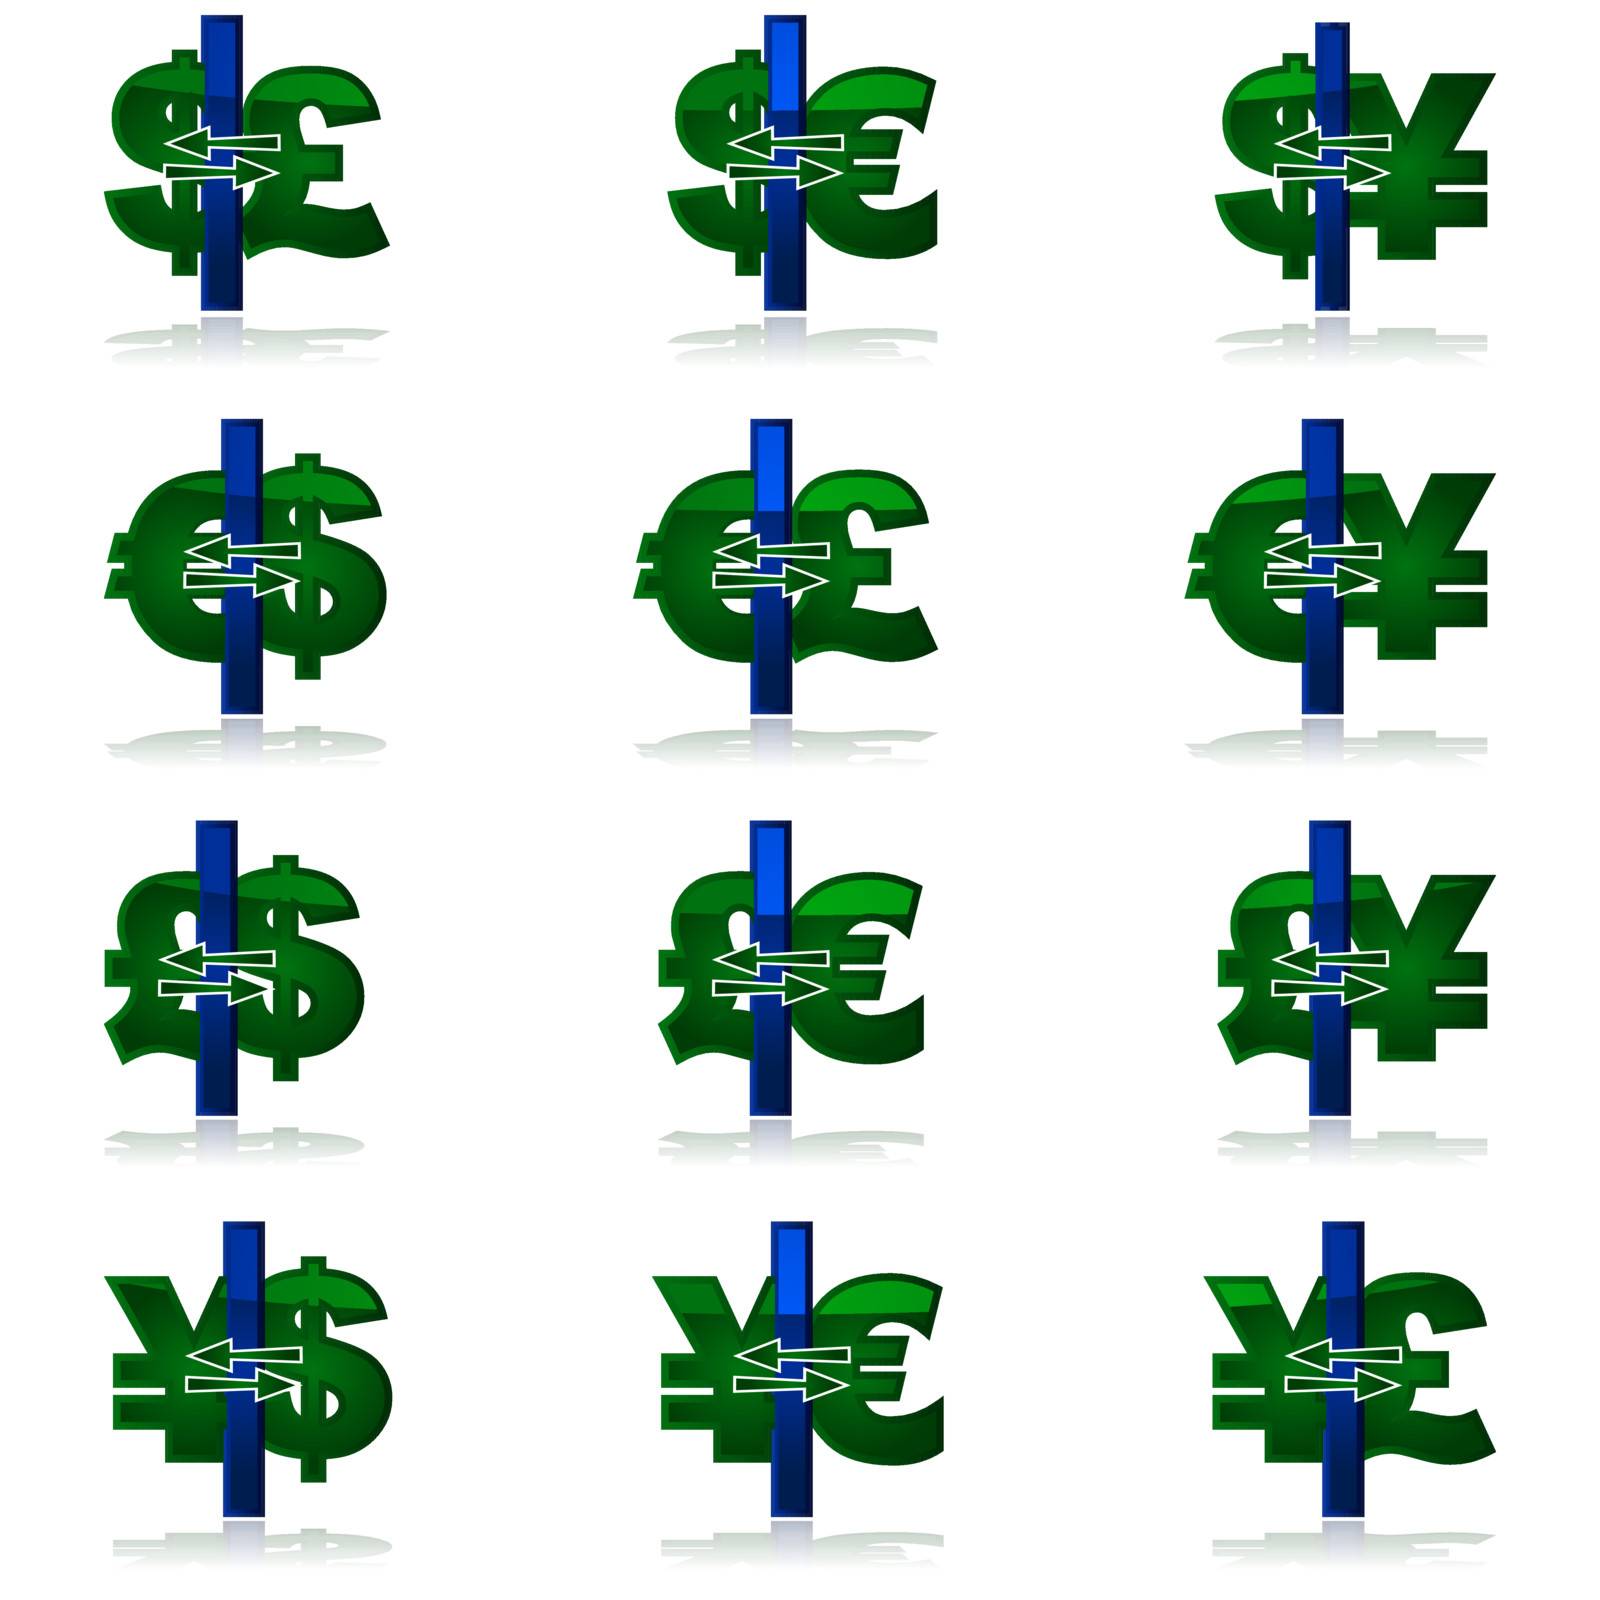 Glossy icon set featuring common currency conversions between dollar, pound, euro and yen